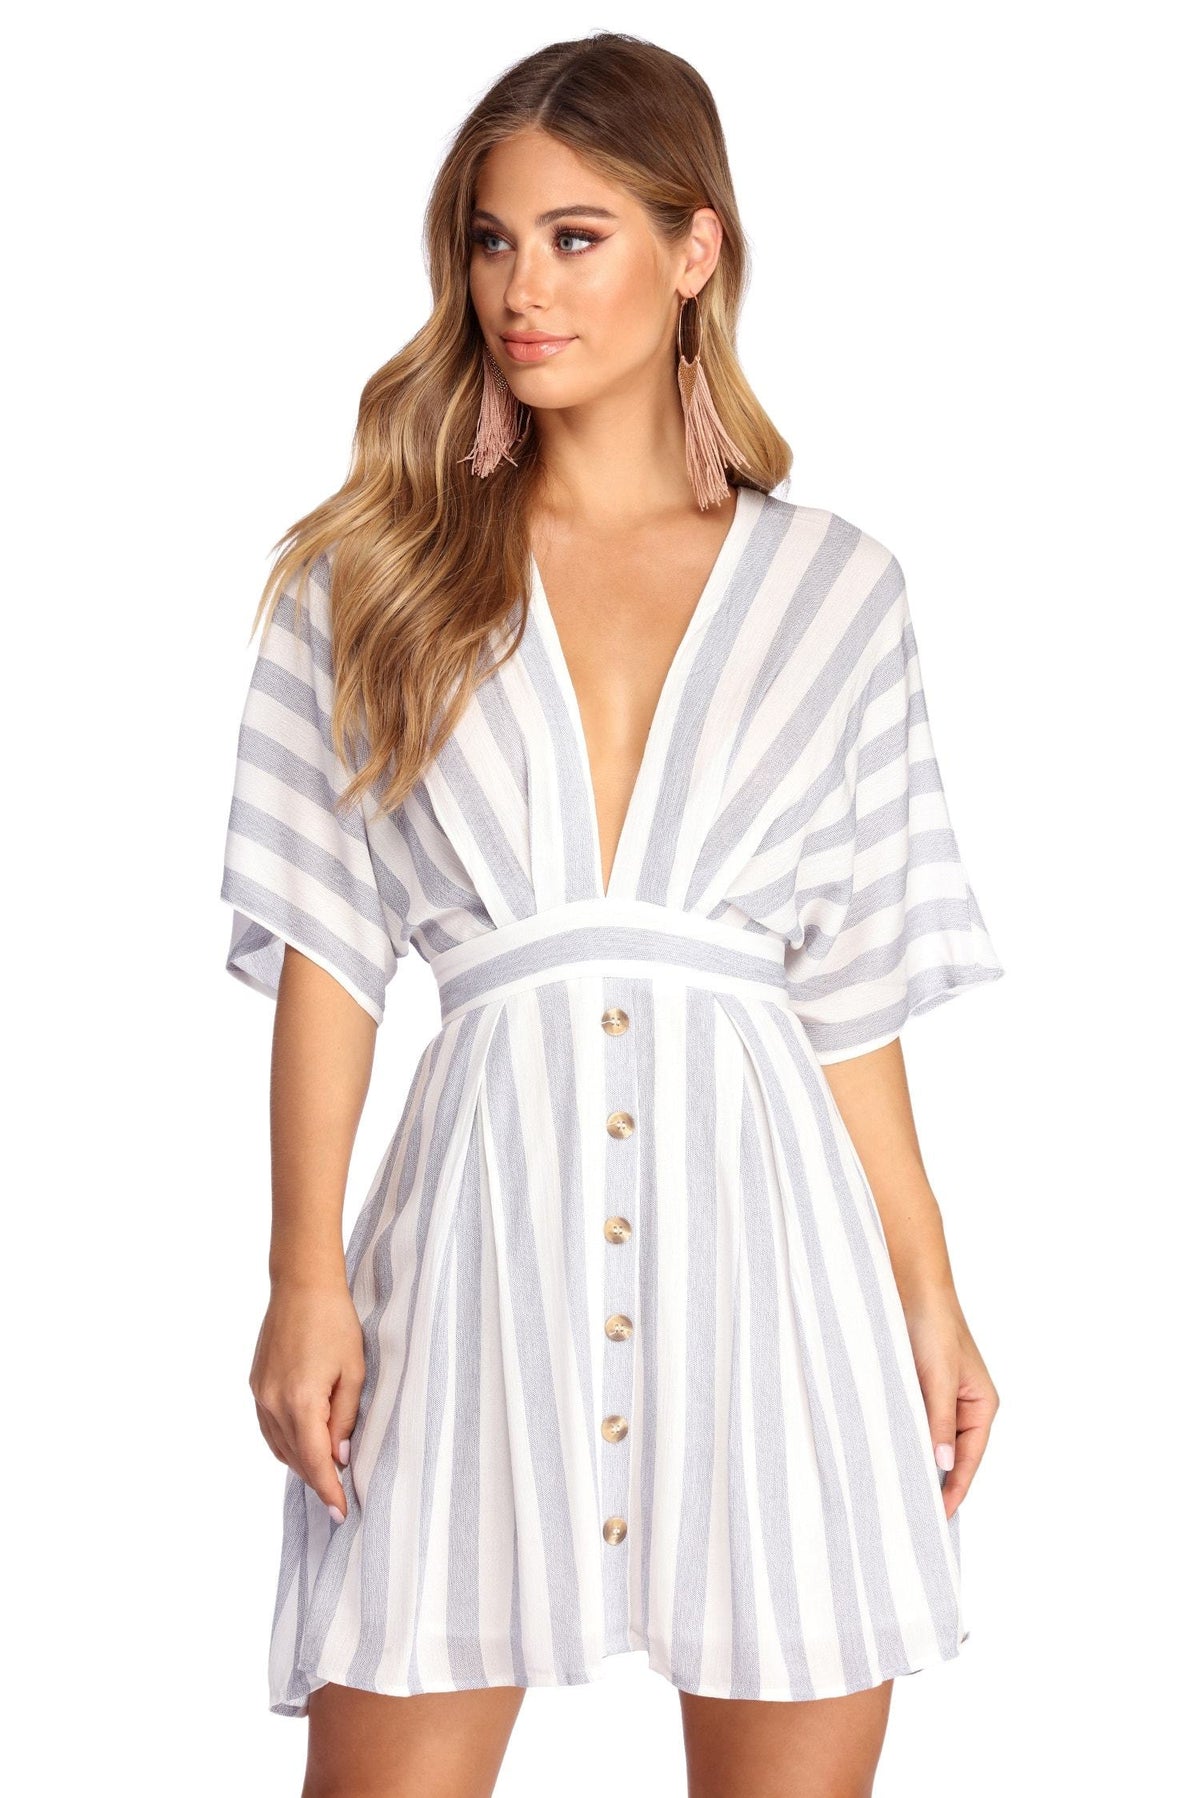 Buttoned Up In Stripes Dress Oshnow